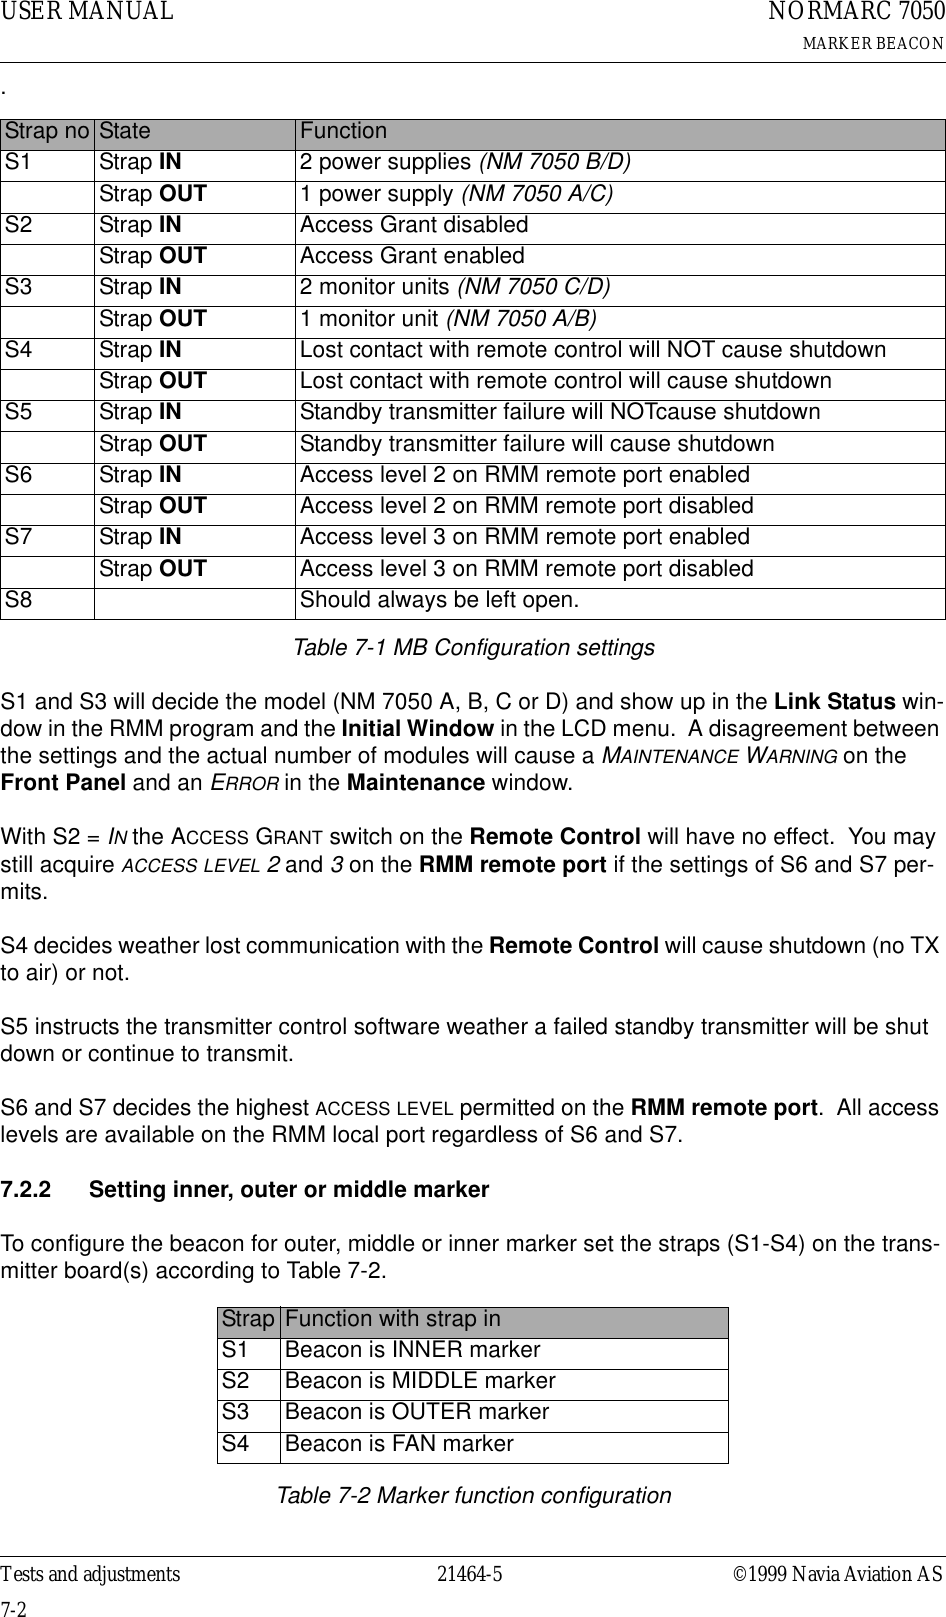 USER MANUAL7-221464-5NORMARC 7050MARKER BEACONTests and adjustments ©1999 Navia Aviation AS.Table 7-1 MB Configuration settingsS1 and S3 will decide the model (NM 7050 A, B, C or D) and show up in the Link Status win-dow in the RMM program and the Initial Window in the LCD menu.  A disagreement between the settings and the actual number of modules will cause a MAINTENANCE WARNING on the Front Panel and an ERROR in the Maintenance window.With S2 = IN the ACCESS GRANT switch on the Remote Control will have no effect.  You may still acquire ACCESS LEVEL 2 and 3 on the RMM remote port if the settings of S6 and S7 per-mits.S4 decides weather lost communication with the Remote Control will cause shutdown (no TX to air) or not.  S5 instructs the transmitter control software weather a failed standby transmitter will be shut down or continue to transmit.S6 and S7 decides the highest ACCESS LEVEL permitted on the RMM remote port.  All access levels are available on the RMM local port regardless of S6 and S7.7.2.2 Setting inner, outer or middle markerTo configure the beacon for outer, middle or inner marker set the straps (S1-S4) on the trans-mitter board(s) according to Table 7-2.Table 7-2 Marker function configurationStrap no State FunctionS1 Strap IN 2 power supplies (NM 7050 B/D)Strap OUT 1 power supply (NM 7050 A/C)S2 Strap IN Access Grant disabledStrap OUT Access Grant enabledS3 Strap IN 2 monitor units (NM 7050 C/D)Strap OUT 1 monitor unit (NM 7050 A/B)S4 Strap IN Lost contact with remote control will NOT cause shutdownStrap OUT Lost contact with remote control will cause shutdownS5 Strap IN Standby transmitter failure will NOTcause shutdownStrap OUT Standby transmitter failure will cause shutdownS6 Strap IN Access level 2 on RMM remote port enabledStrap OUT Access level 2 on RMM remote port disabledS7 Strap IN Access level 3 on RMM remote port enabledStrap OUT Access level 3 on RMM remote port disabledS8 Should always be left open.Strap Function with strap inS1 Beacon is INNER markerS2 Beacon is MIDDLE markerS3 Beacon is OUTER markerS4 Beacon is FAN marker